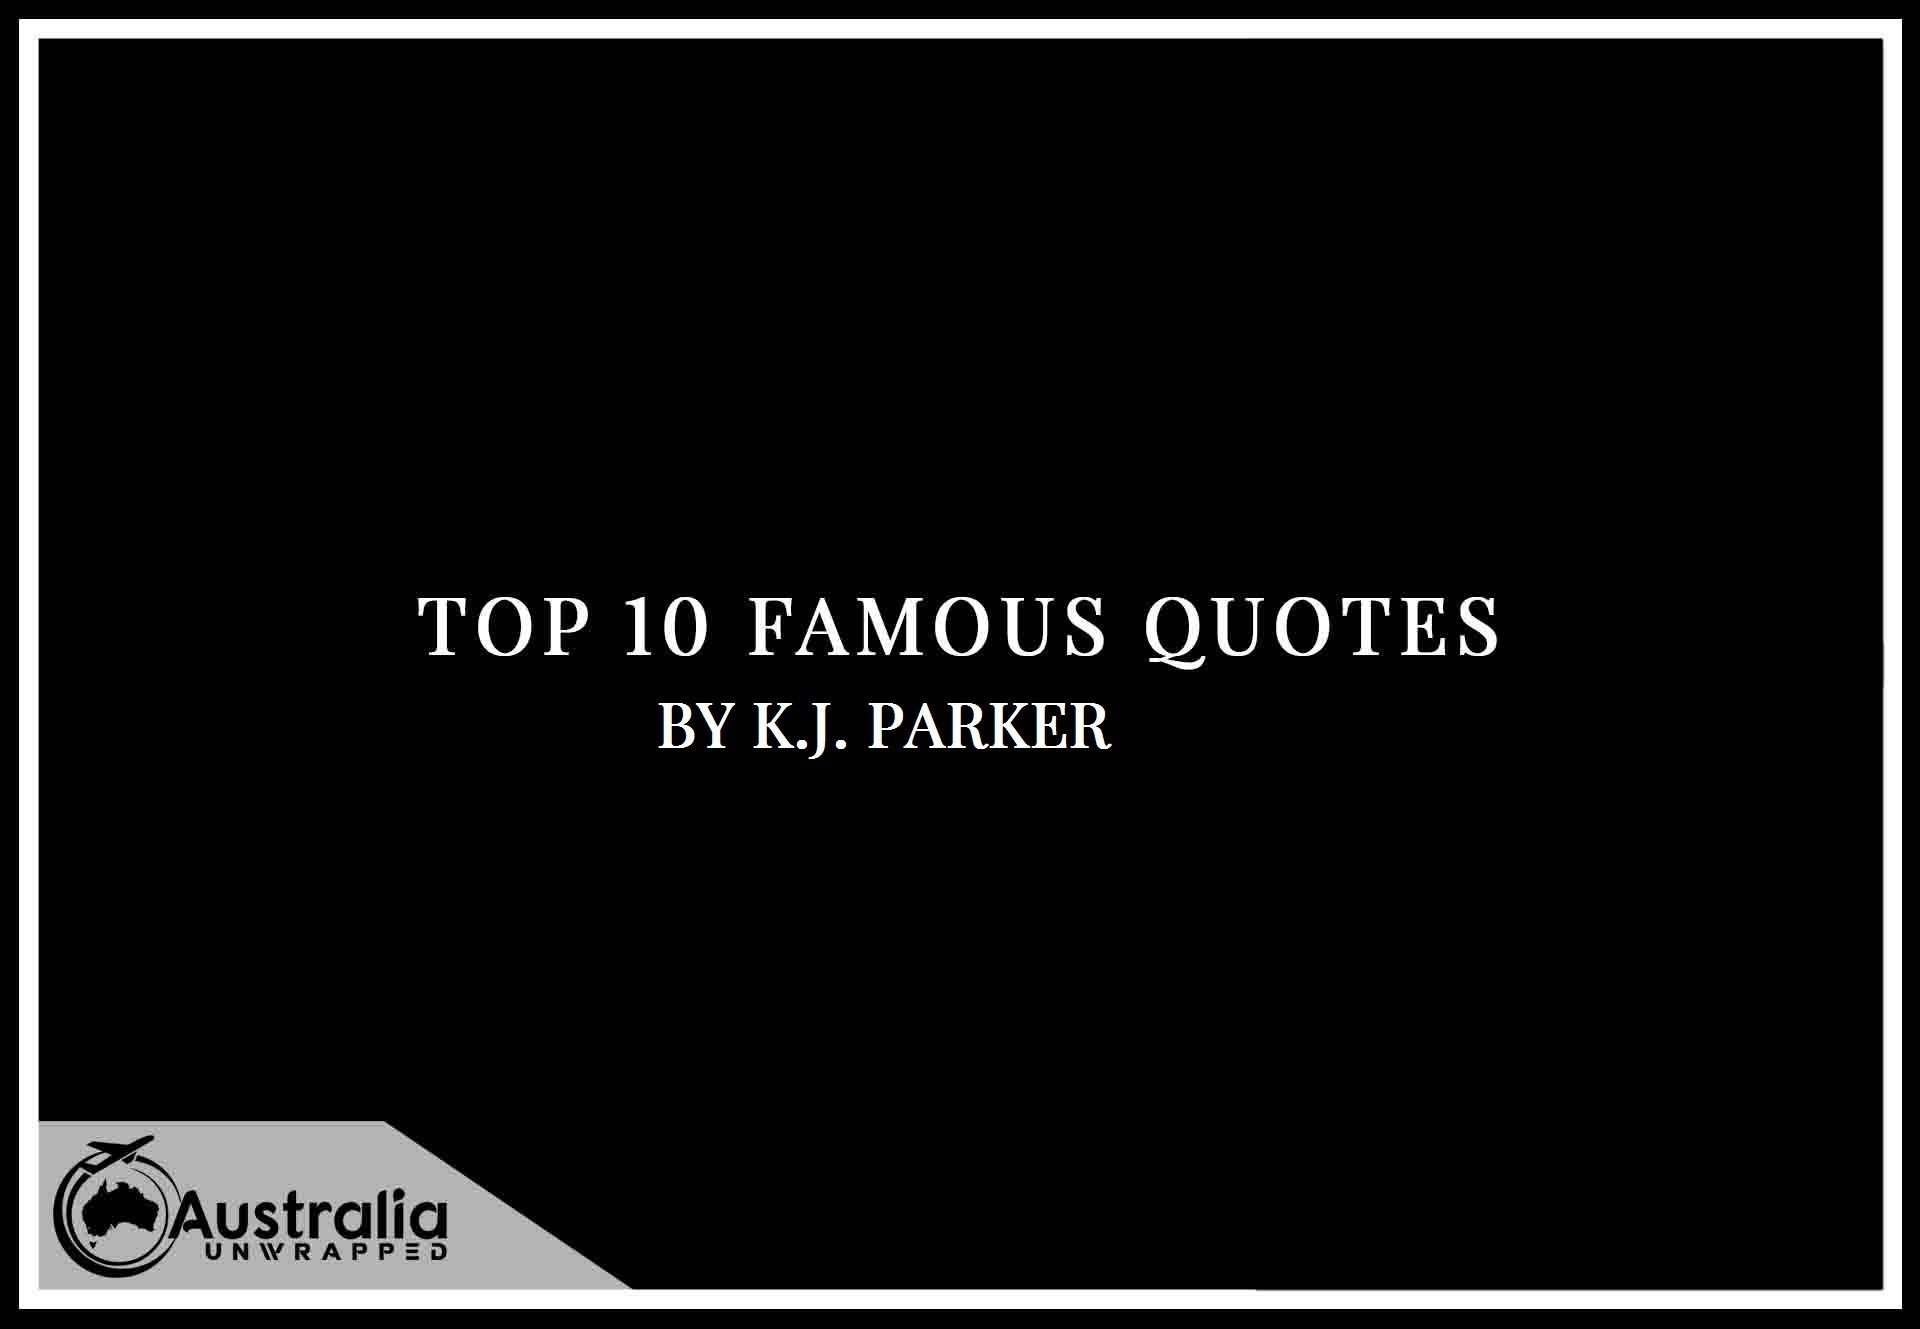 K. J. Parker’s Top 10 Popular and Famous Quotes